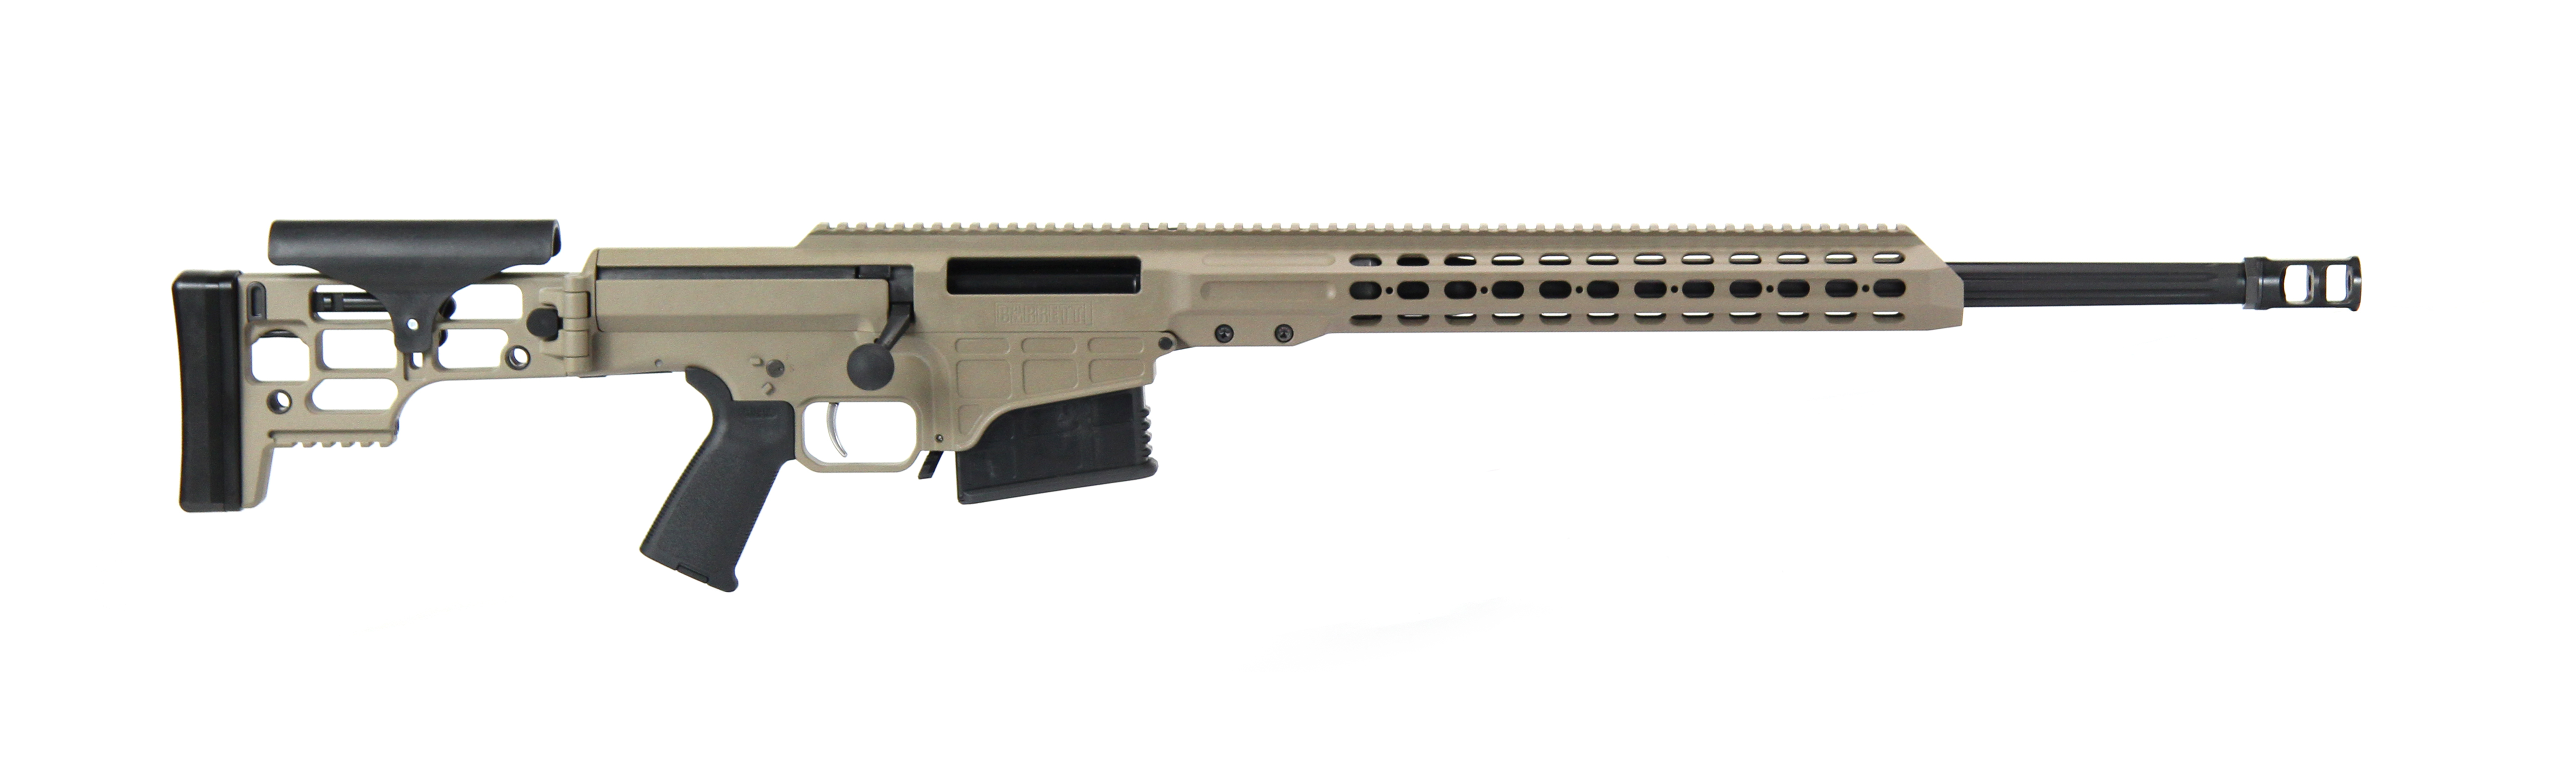 Special ops snipers will soon shoot this new rifle that can fire